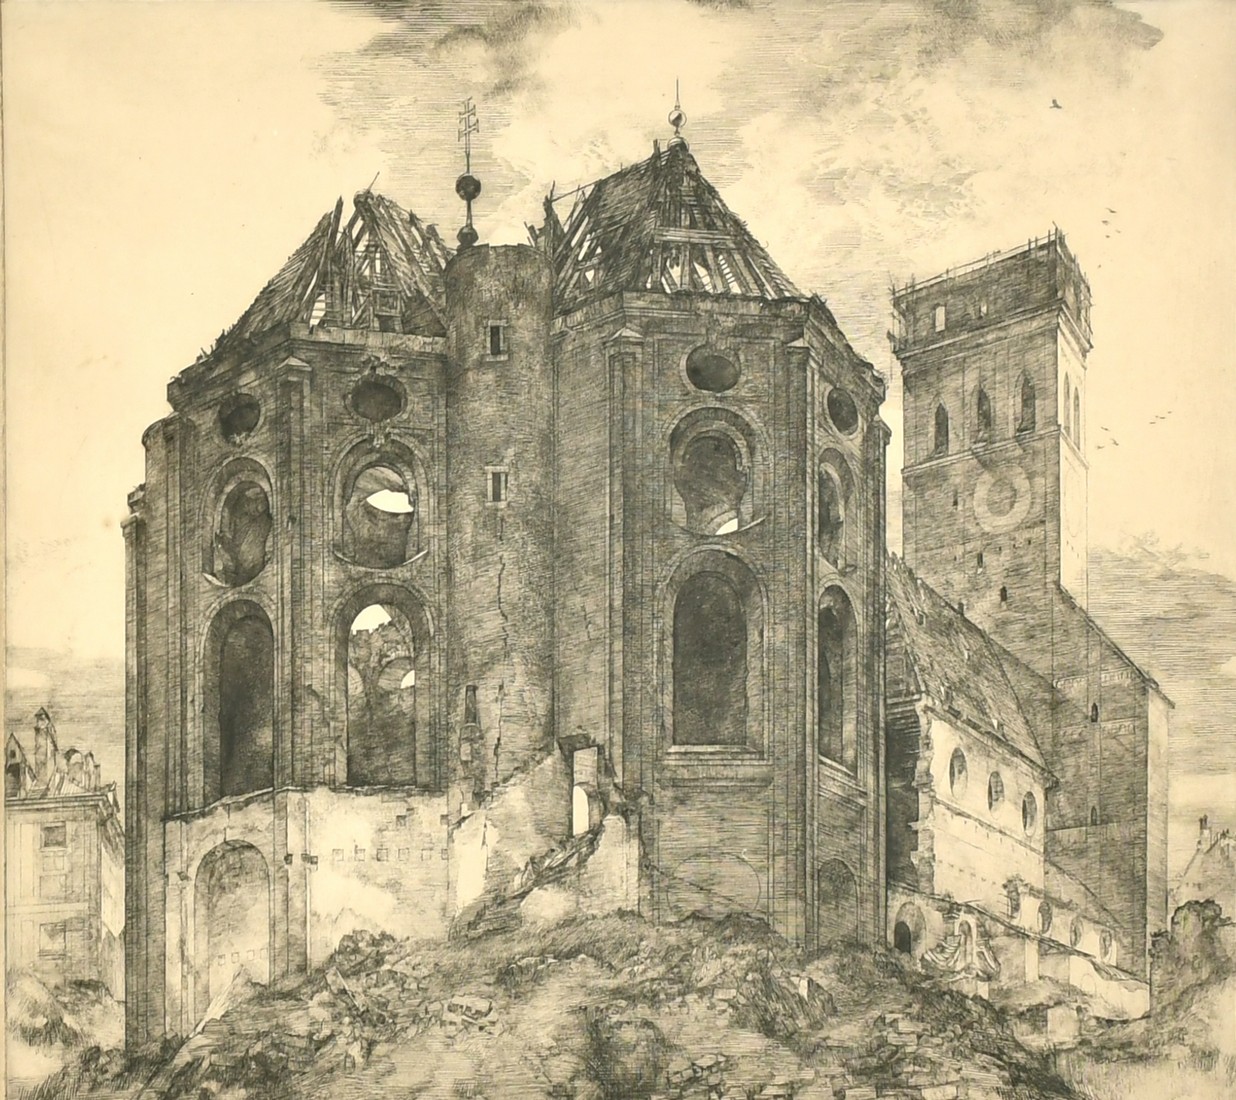 Walter Klinkert, 'St Peter in Munchen, 1946', signed, inscribed, and numbered in pencil, plate